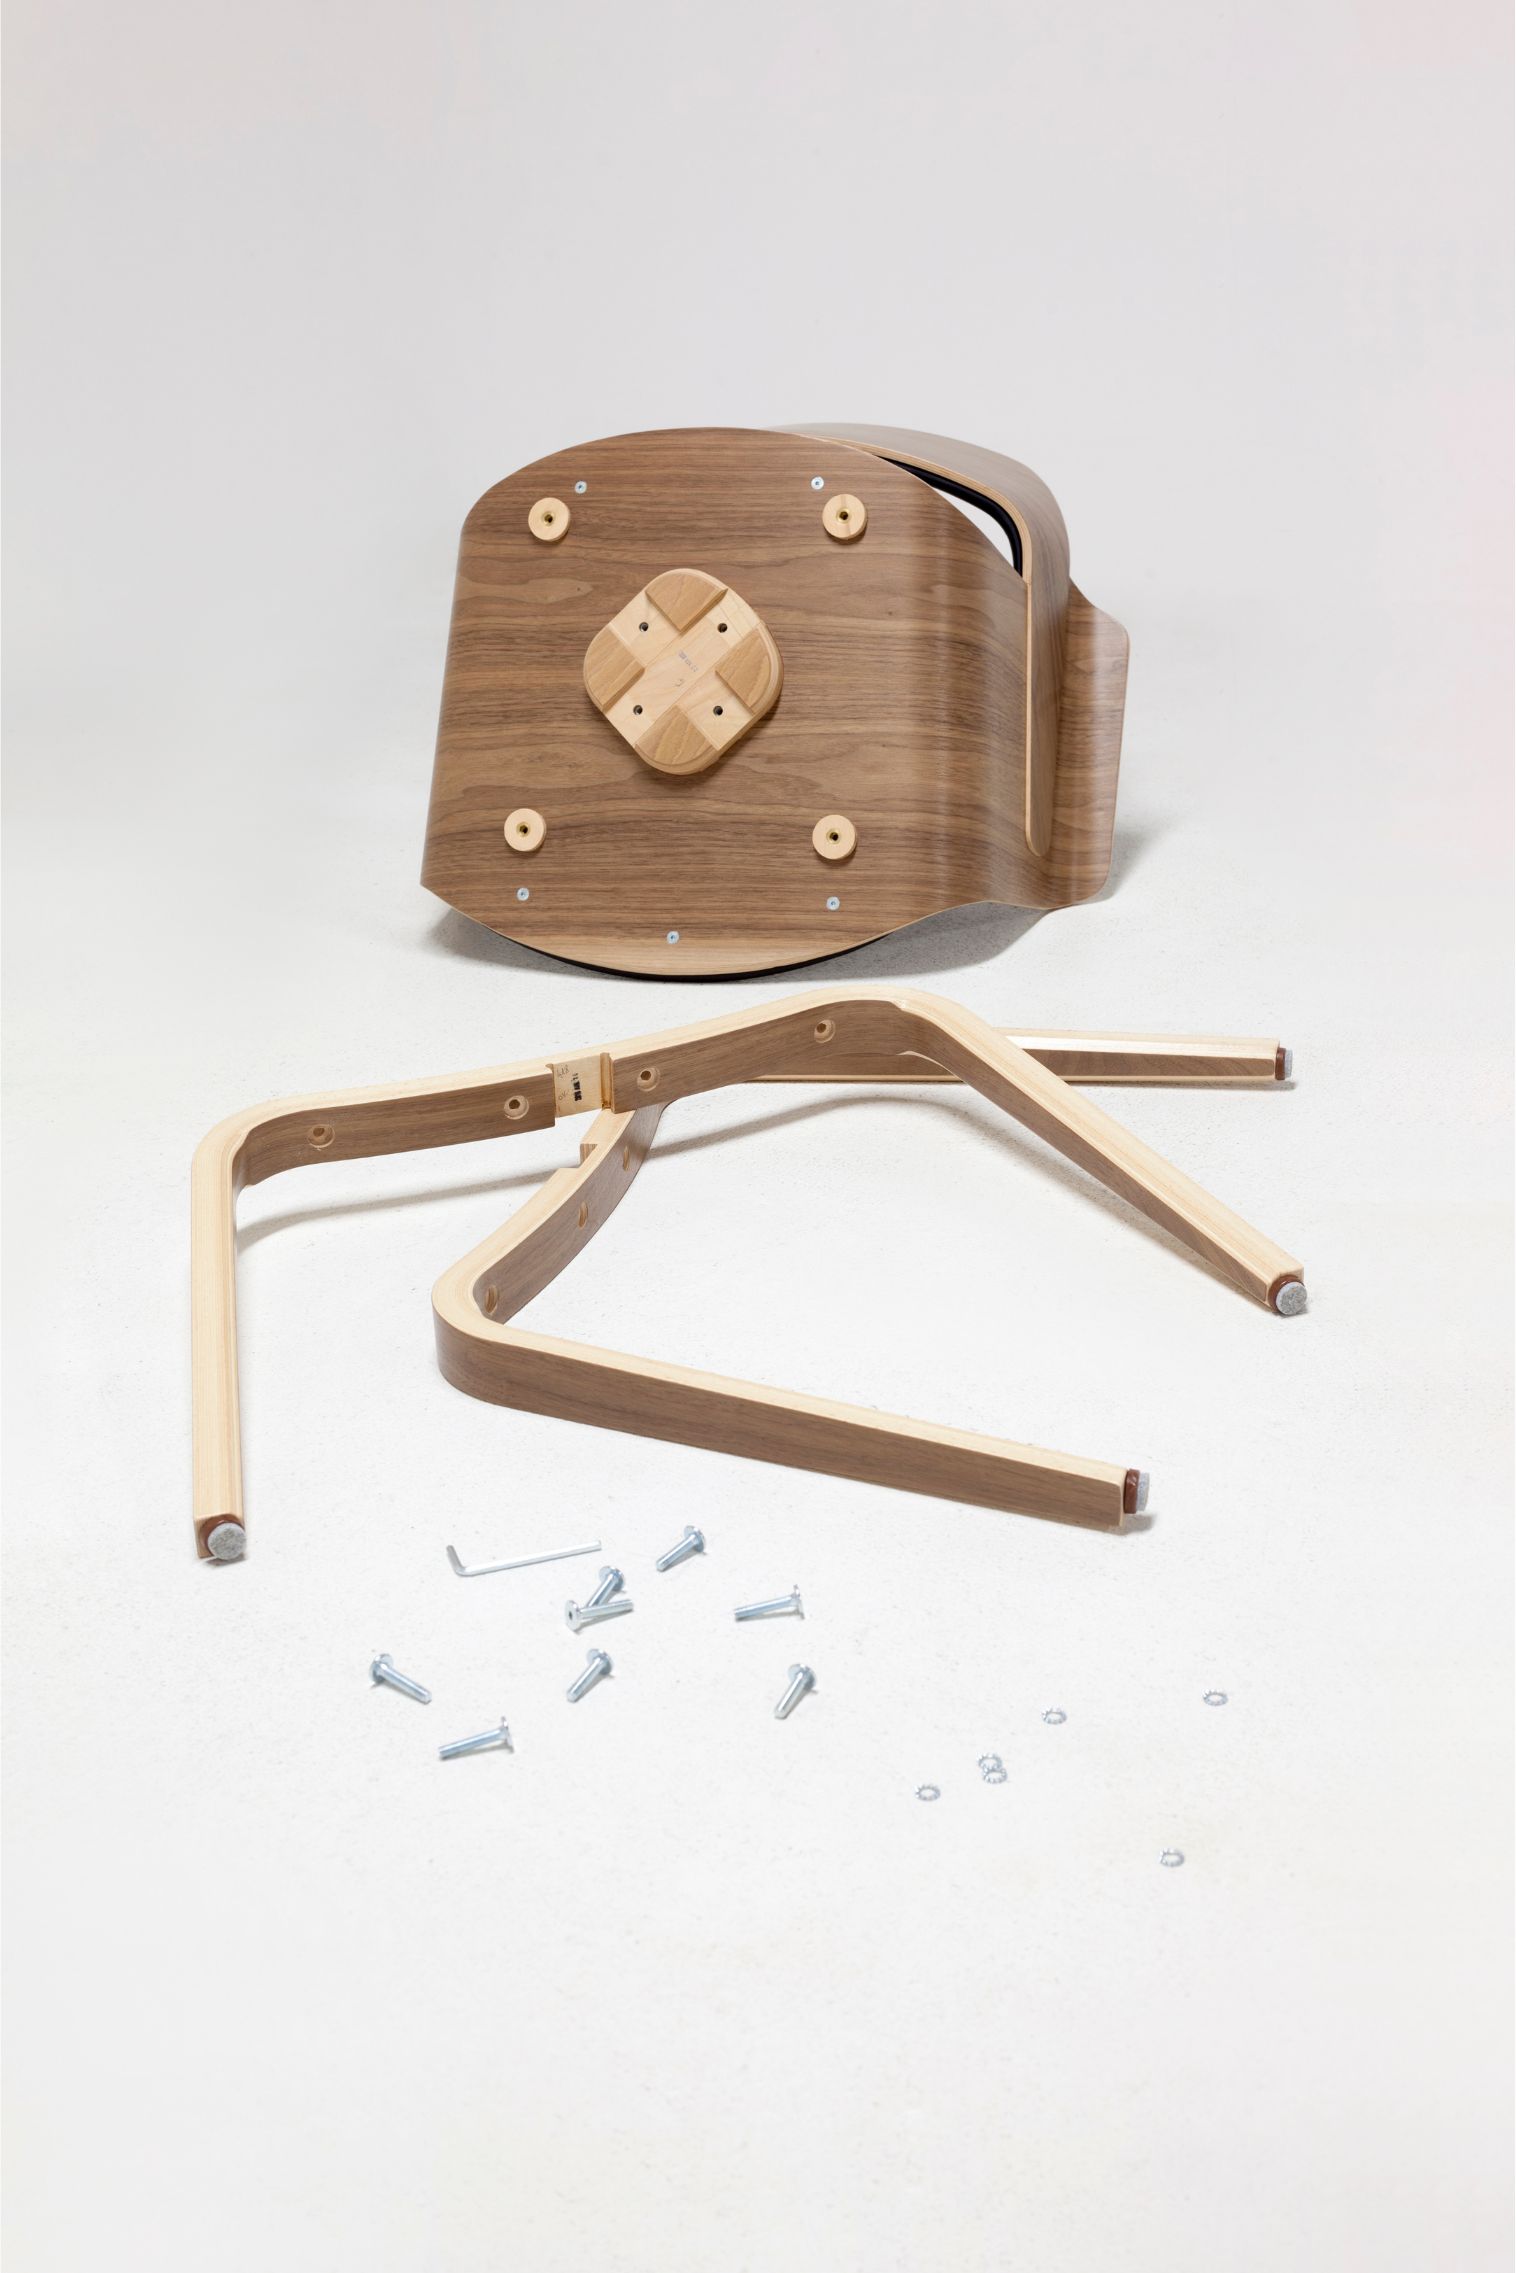 Disassembled armchair in American walnut plywood